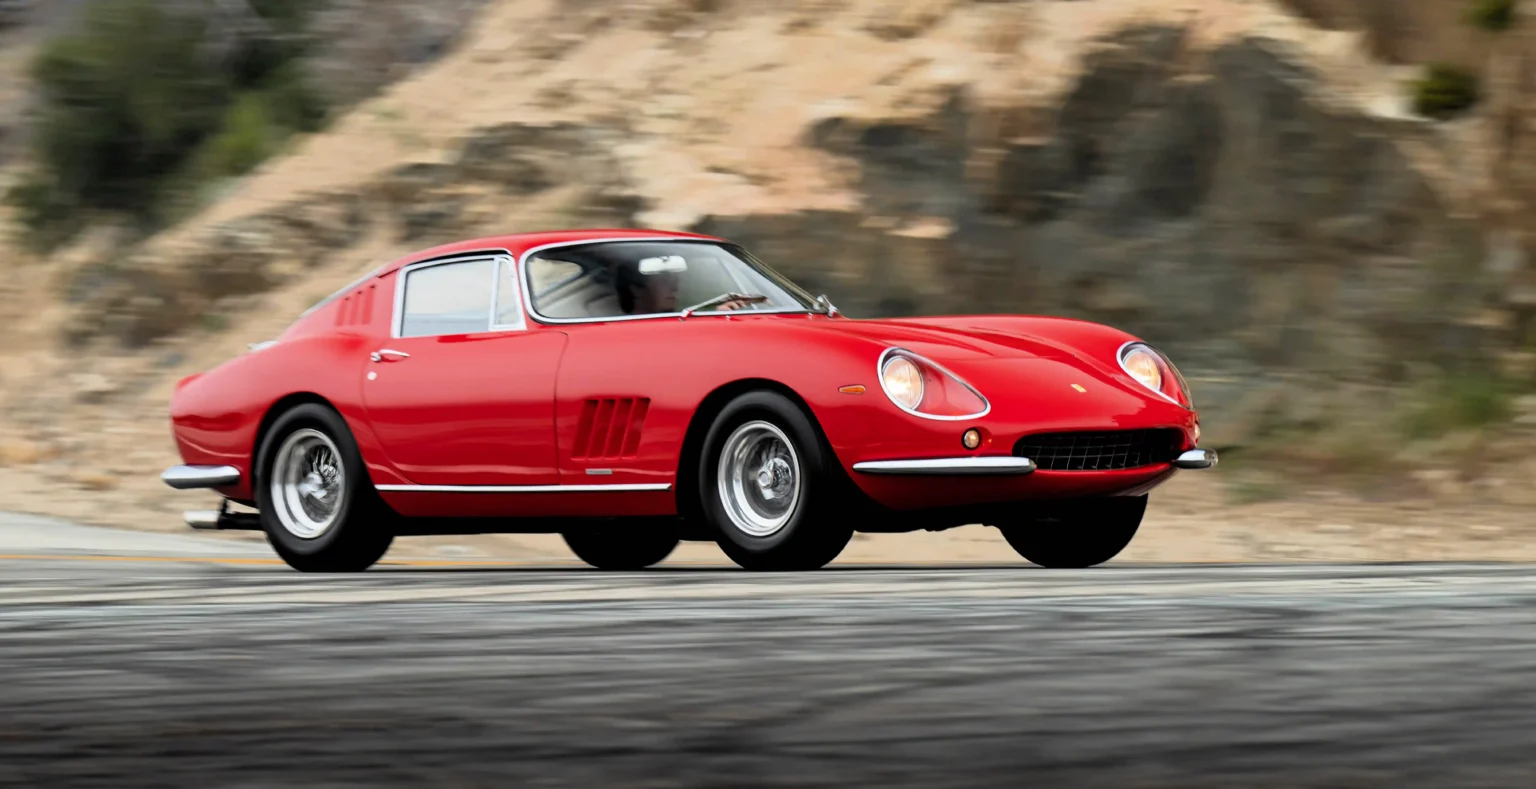 Rare Ferrari, one of 16 made, hits auction block at £3.5 million. Classic red 275 GTB/4 boasts top speed of 167mph, historic provenance included.